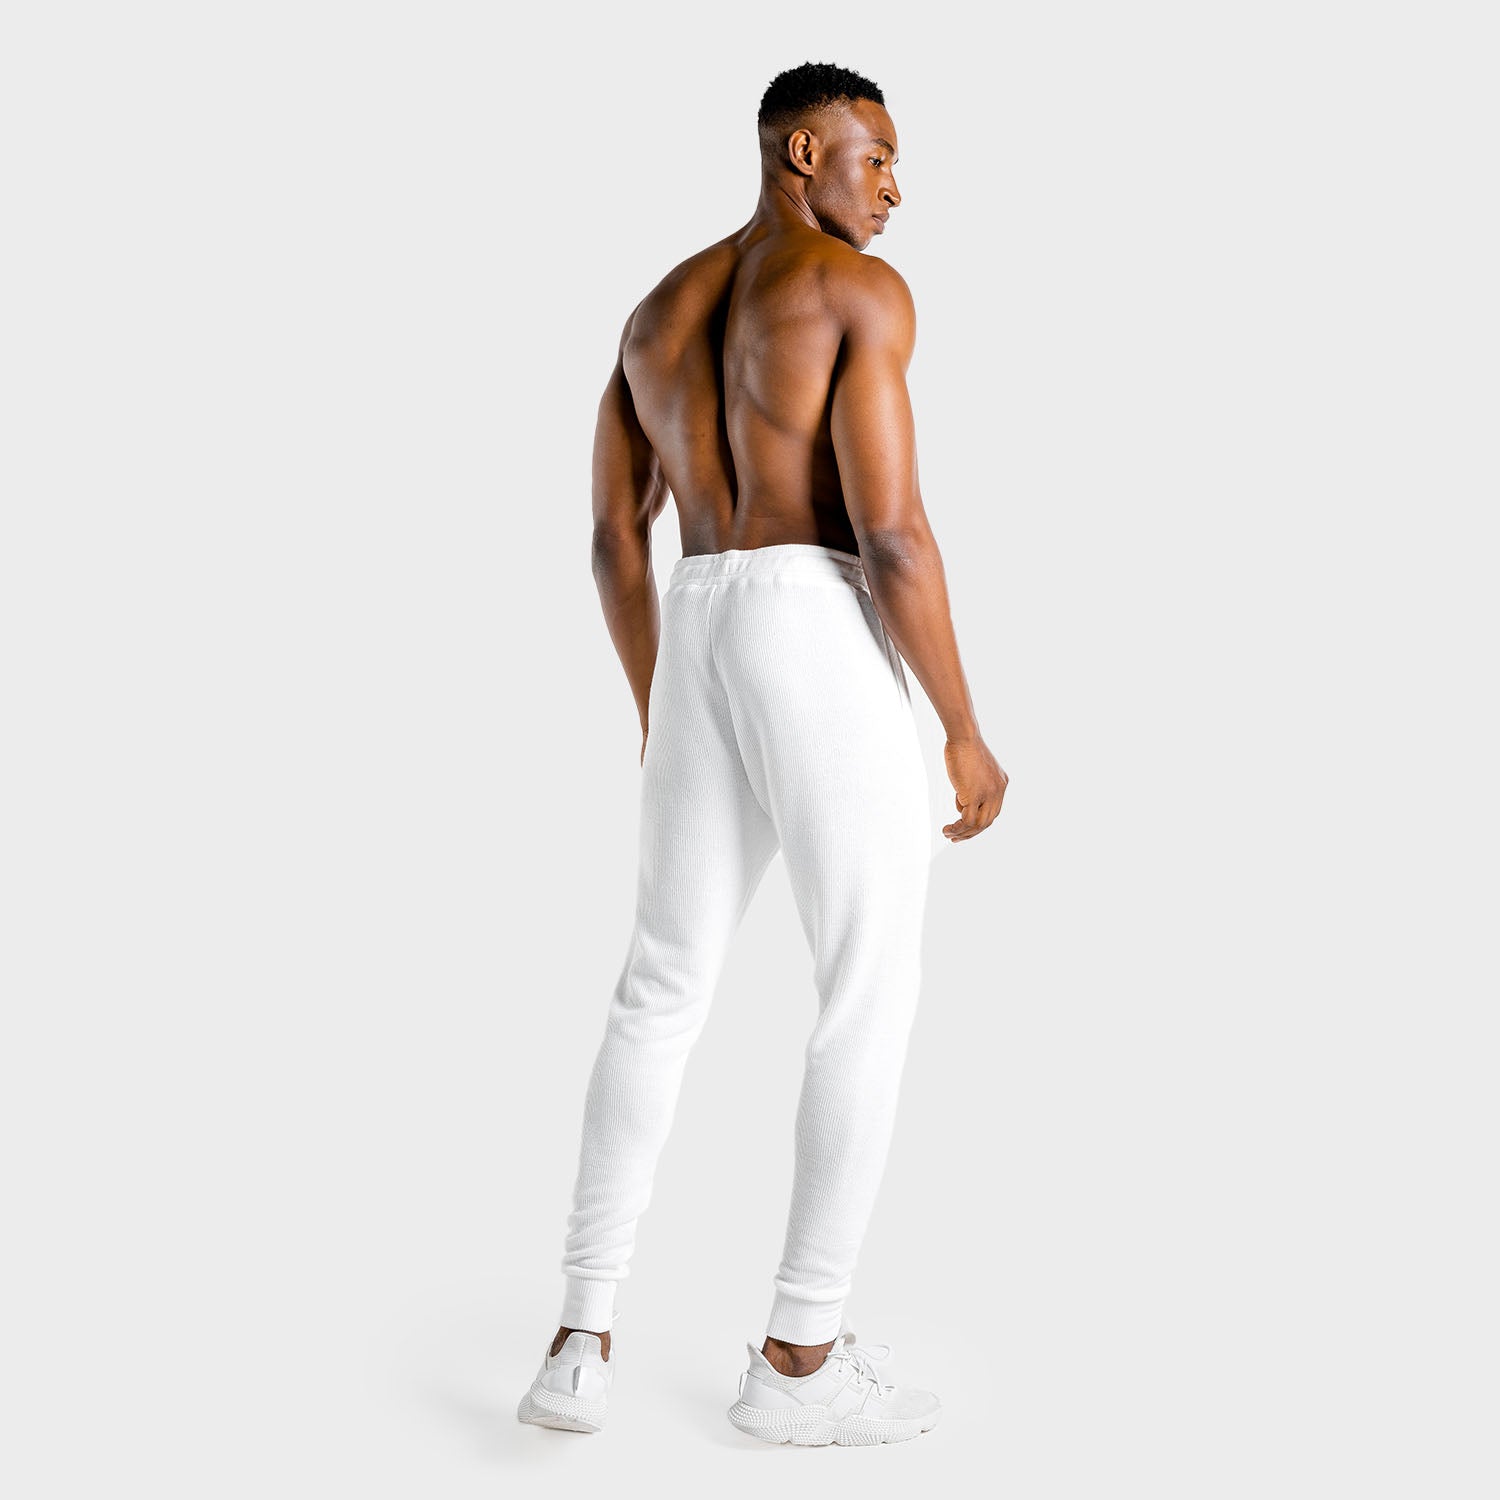 squatwolf-workout-pants-for-men-luxe-joggers-white-gym-wear